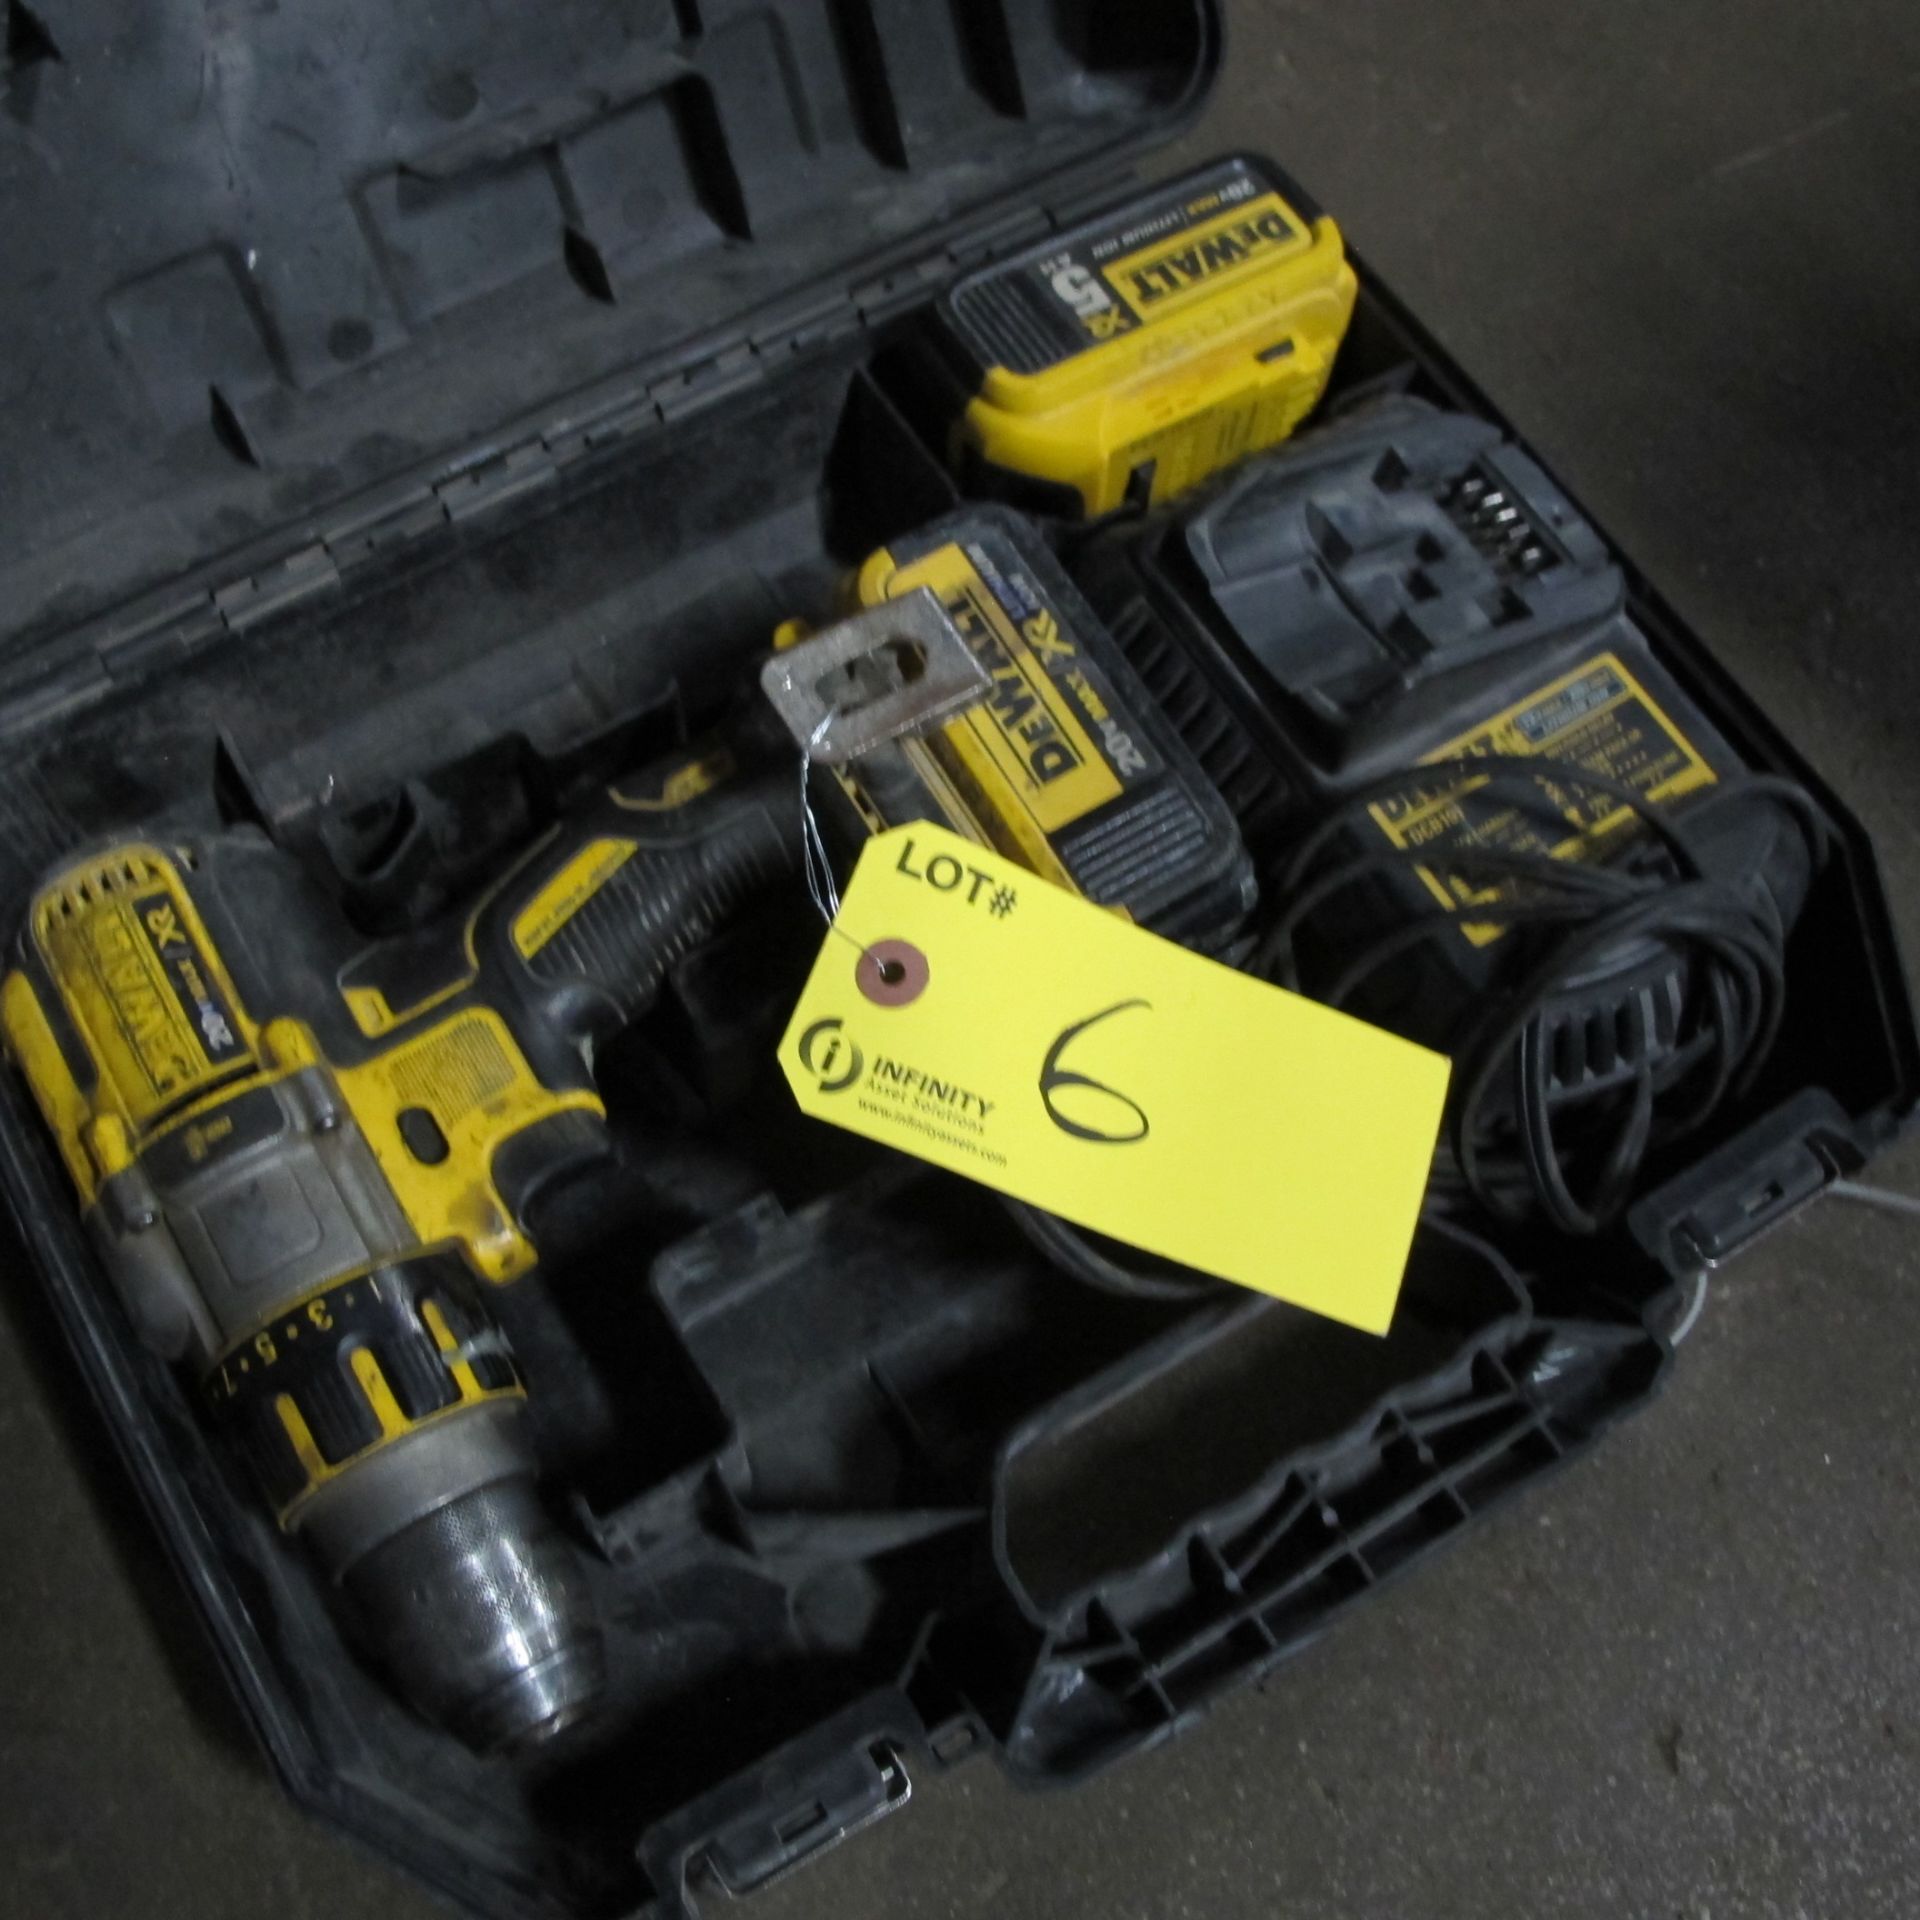 DEWALT 20 MAX XR CORDLESS DRILL DCD995 W/ (2) 20V BATTERIES, CHARGER AND CASE